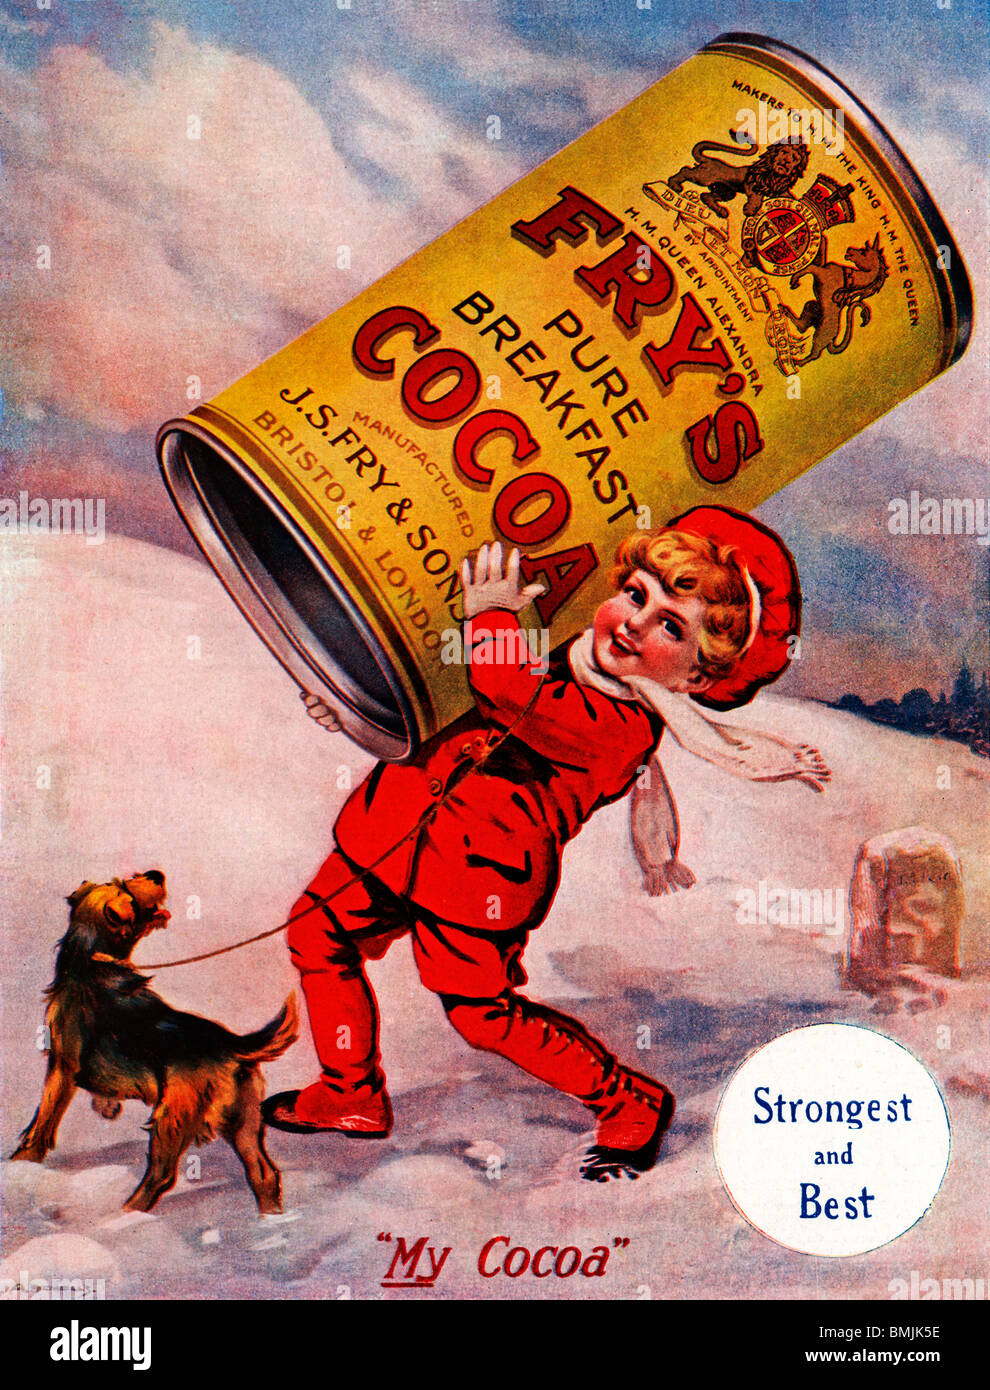 Frys Cocoa, 1920 English magazine advert for the drinking chocolate, tin here carried by a red clothed boy in the snow Stock Photo